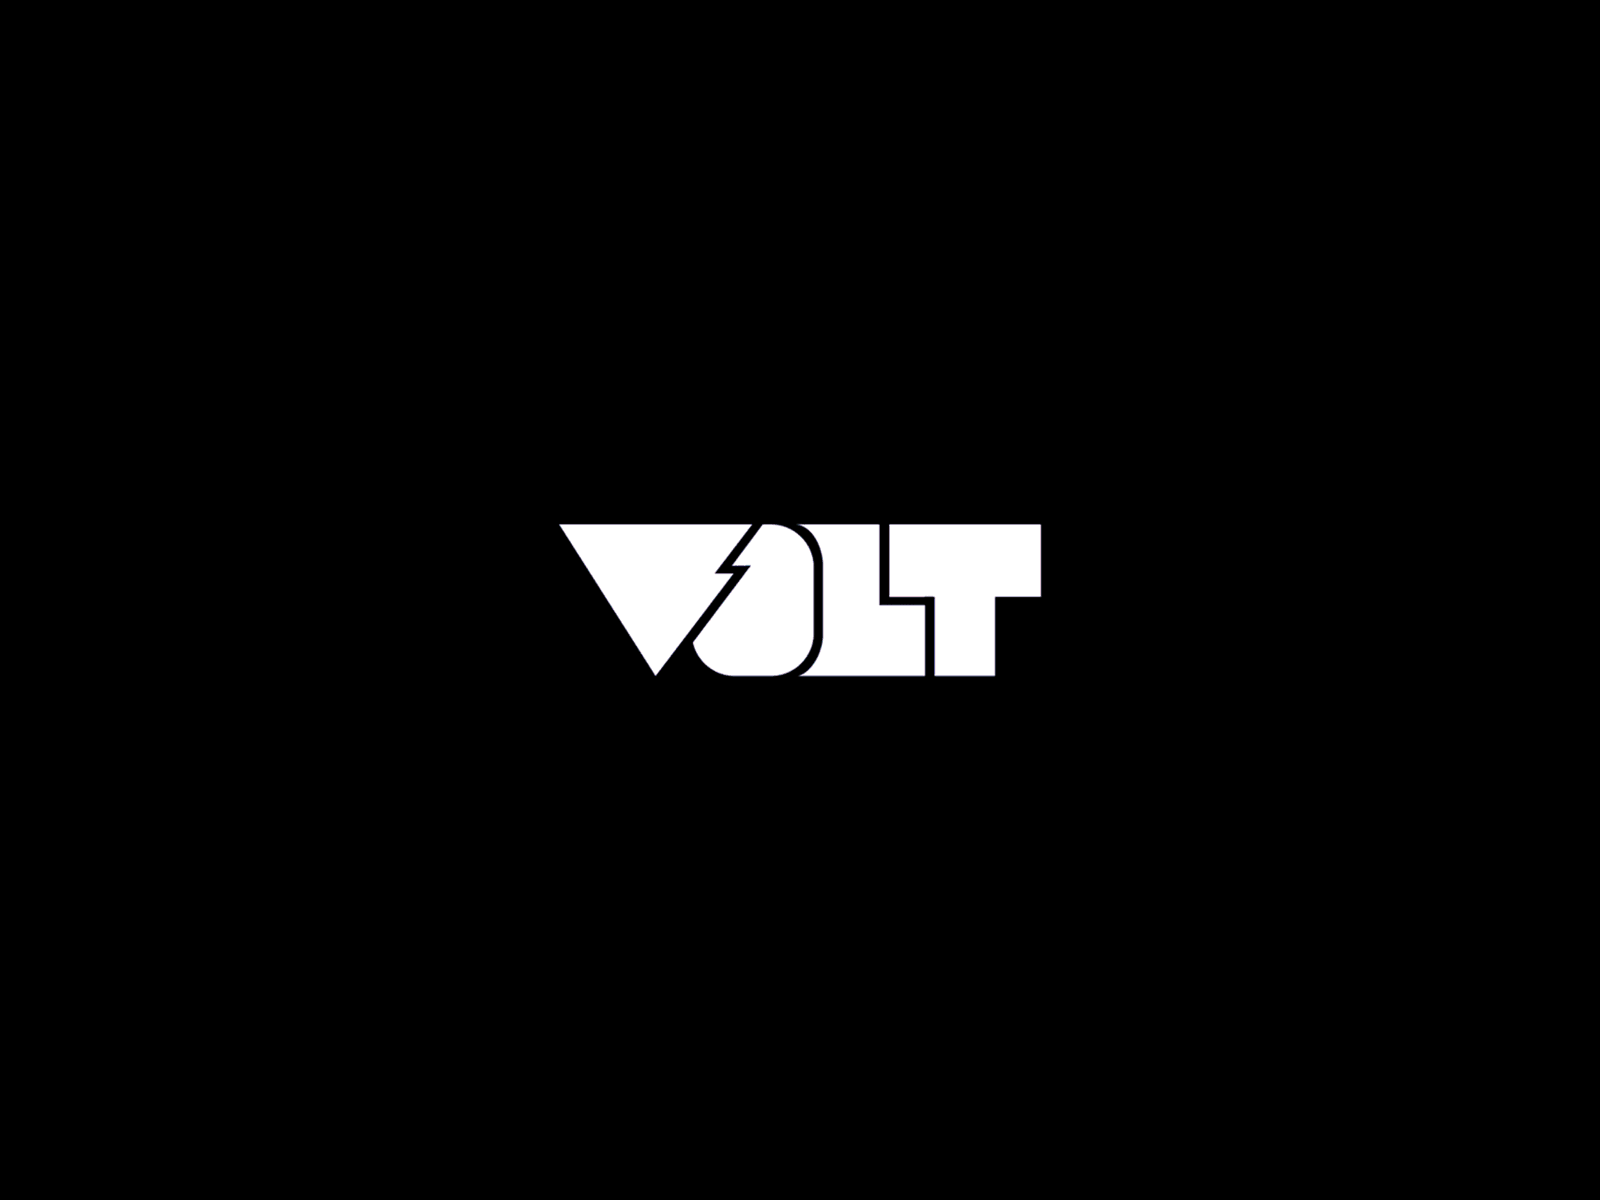 VOLT by Loyall on Dribbble